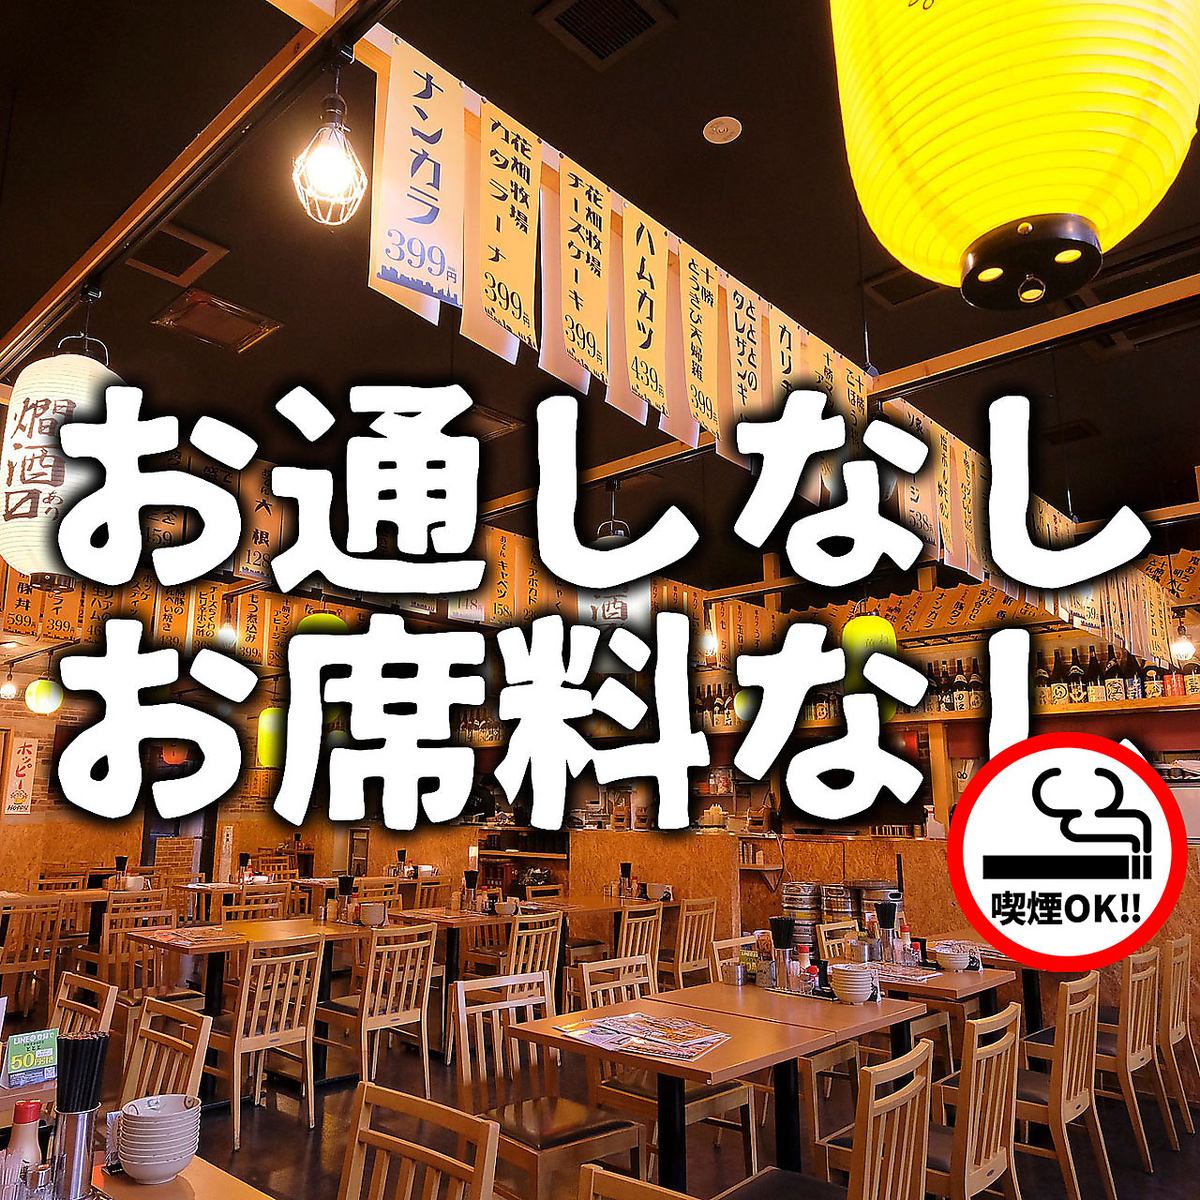 A 3-minute walk from JR Obihiro Station! Easy to get together in a good location at the station ★ Perfect for various banquets!